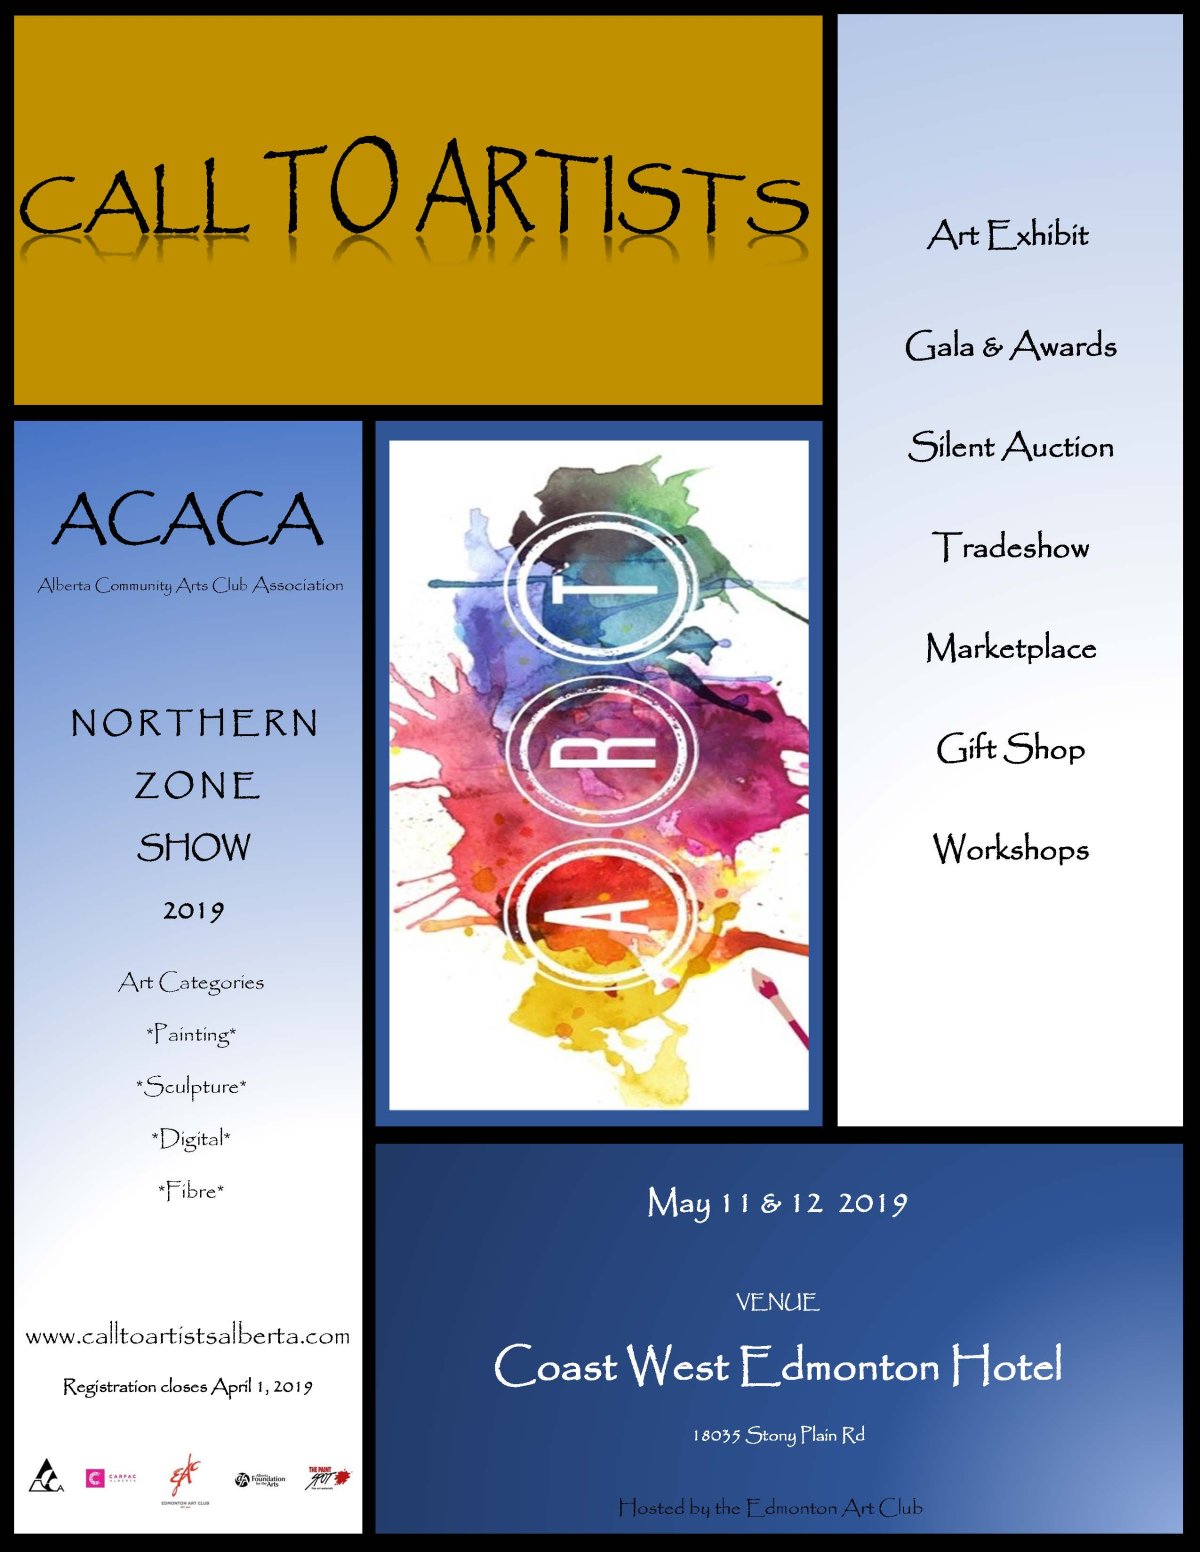 Call to Artists ACACA Northern Zone Show 2019 - image